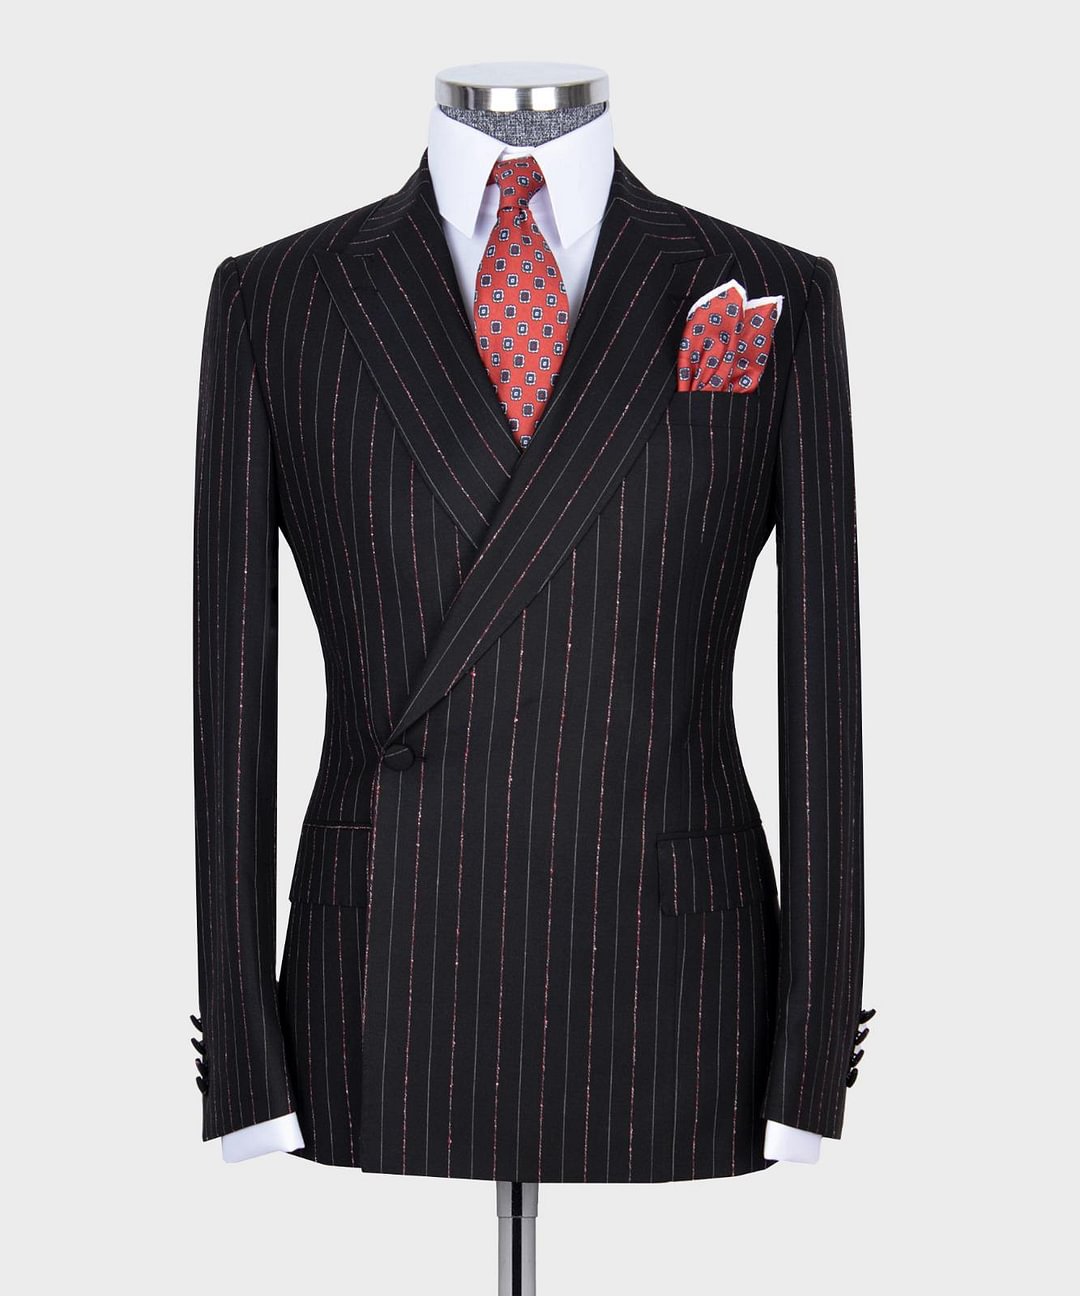 Men's black and burgundy pinstripe single button double breasted 2pcs suit.